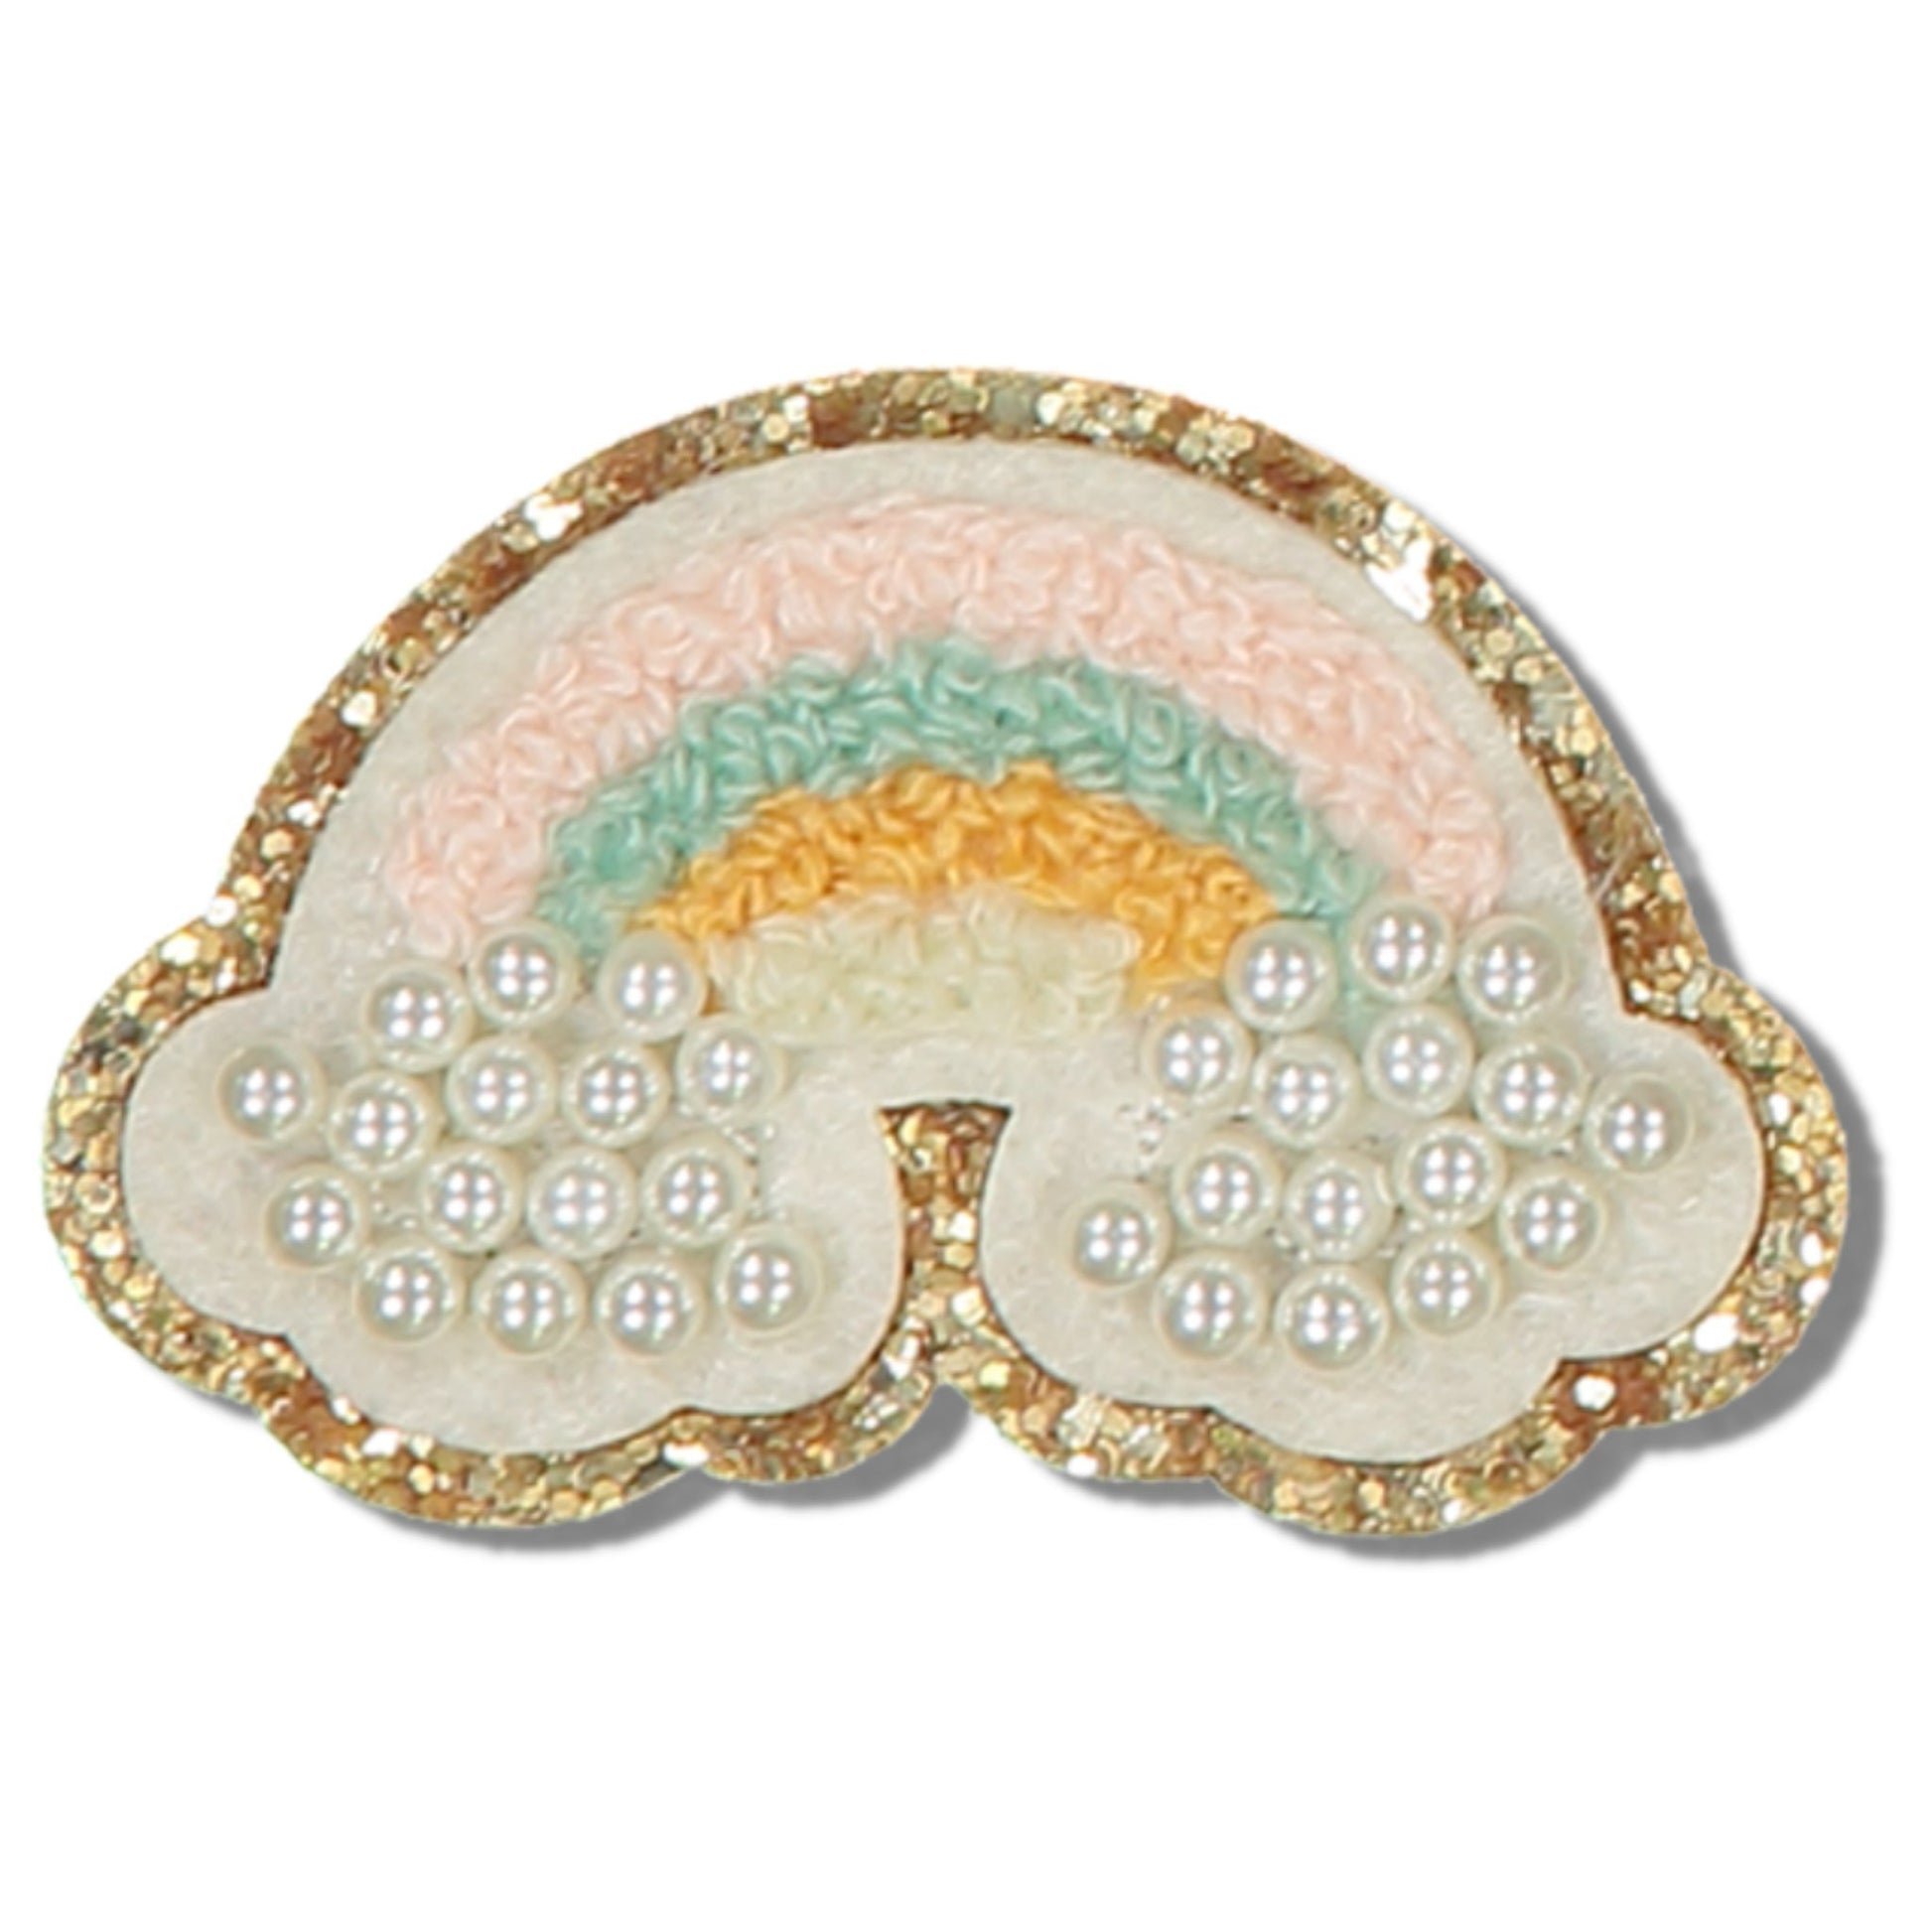 SCLN Multi Glitter Pearl Fall Rainbow Patch - a Spirit Animal - Patches Clover handbags-accessories handbags-accressories